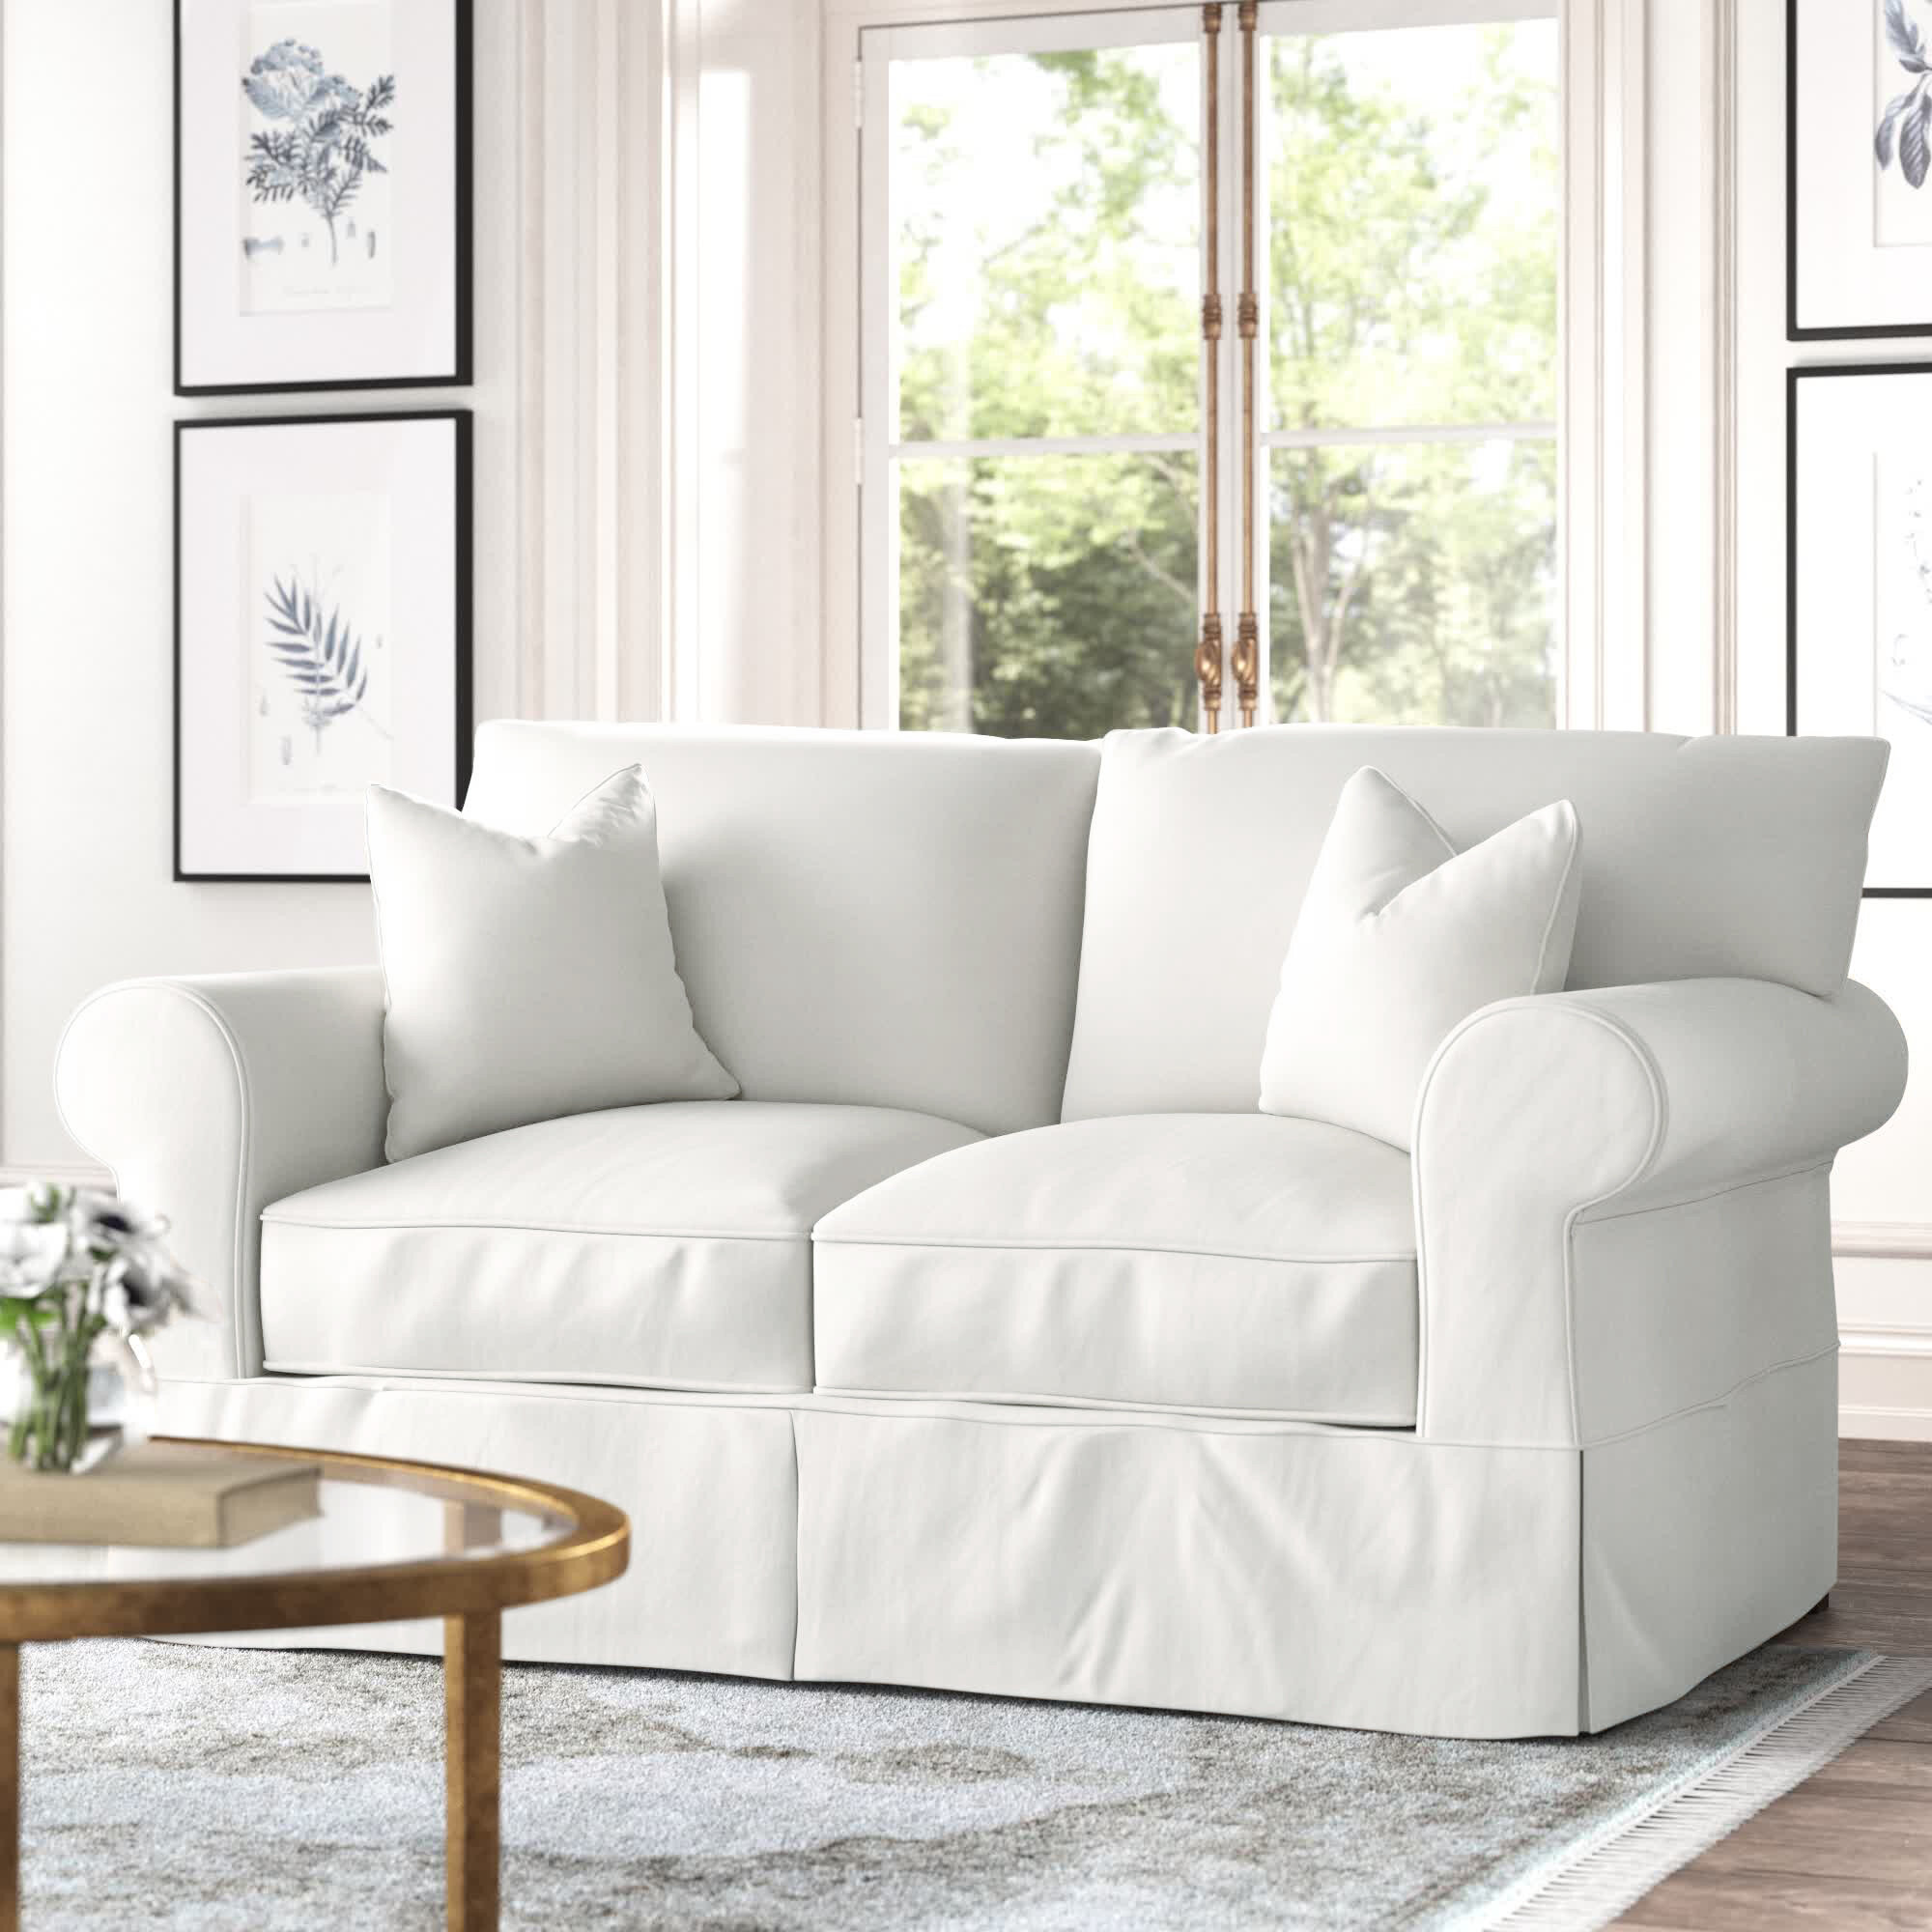 Aubagne 65” Cotton Rolled Arm Slipcovered Loveseat